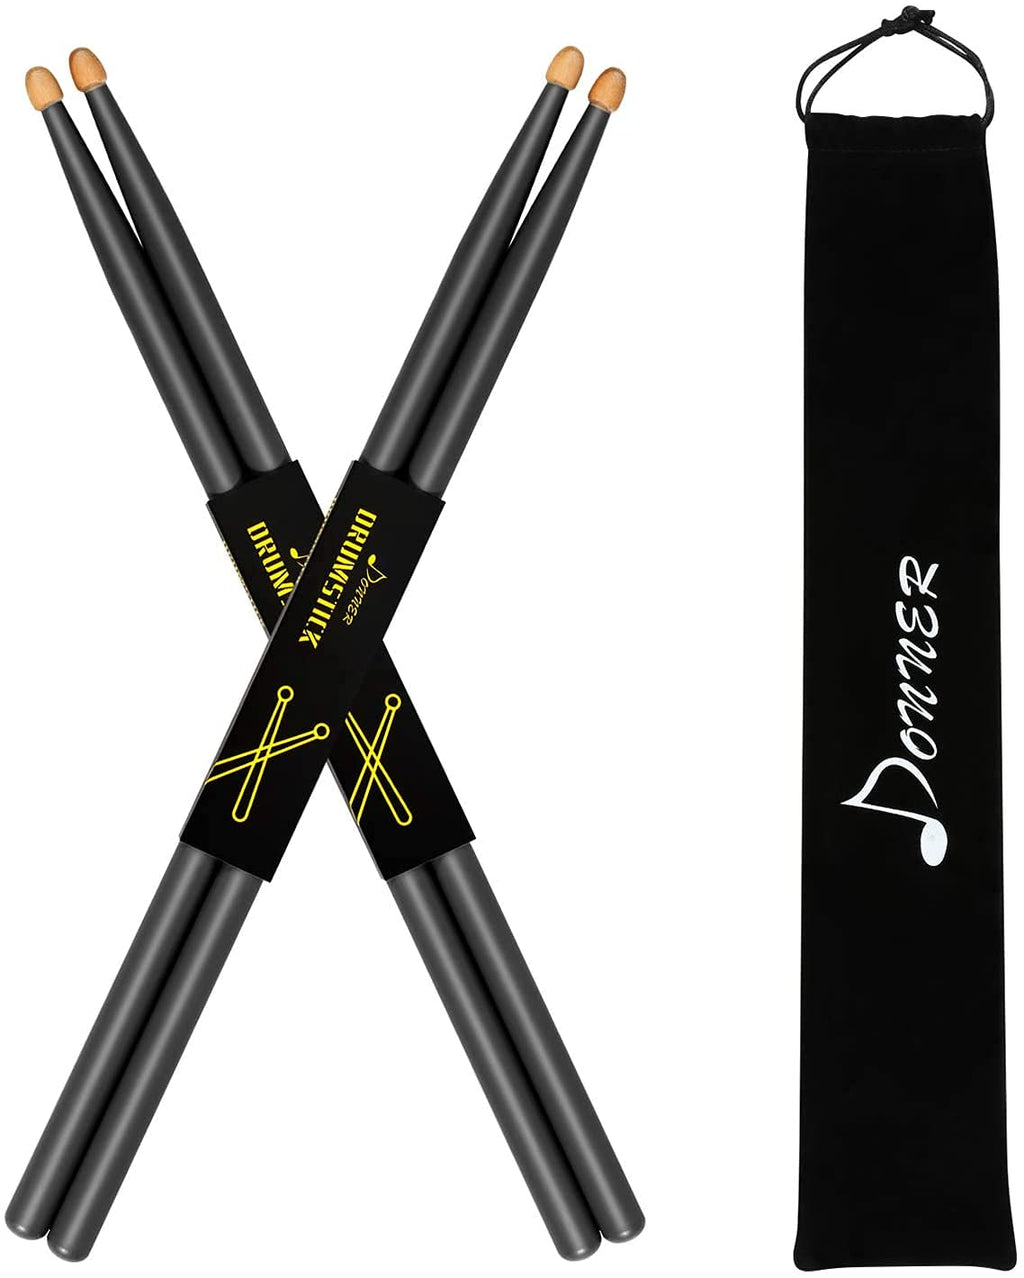 Donner 5A Drum Sticks Maple Wood Drumsticks 2 Pair with Carrying Bag-Black